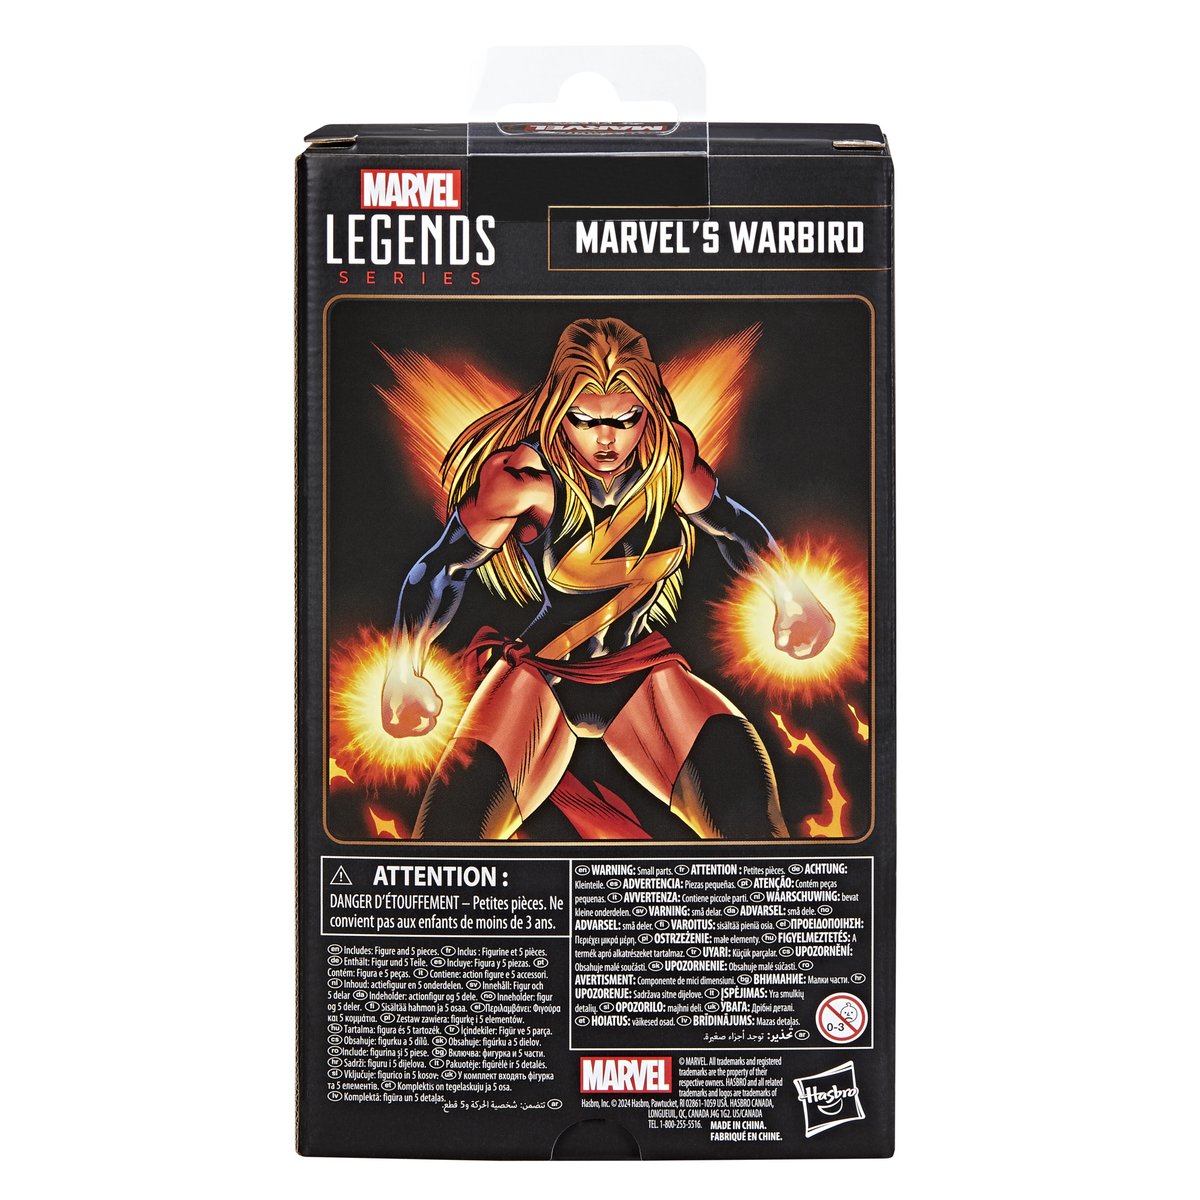 Hasbro Marvel Legends Warbird, Target exclusive will go up for preorder next Thursday (5/9) at 9 AM EST ($24.99) - bit.ly/44p24r6

Link will not work until live.